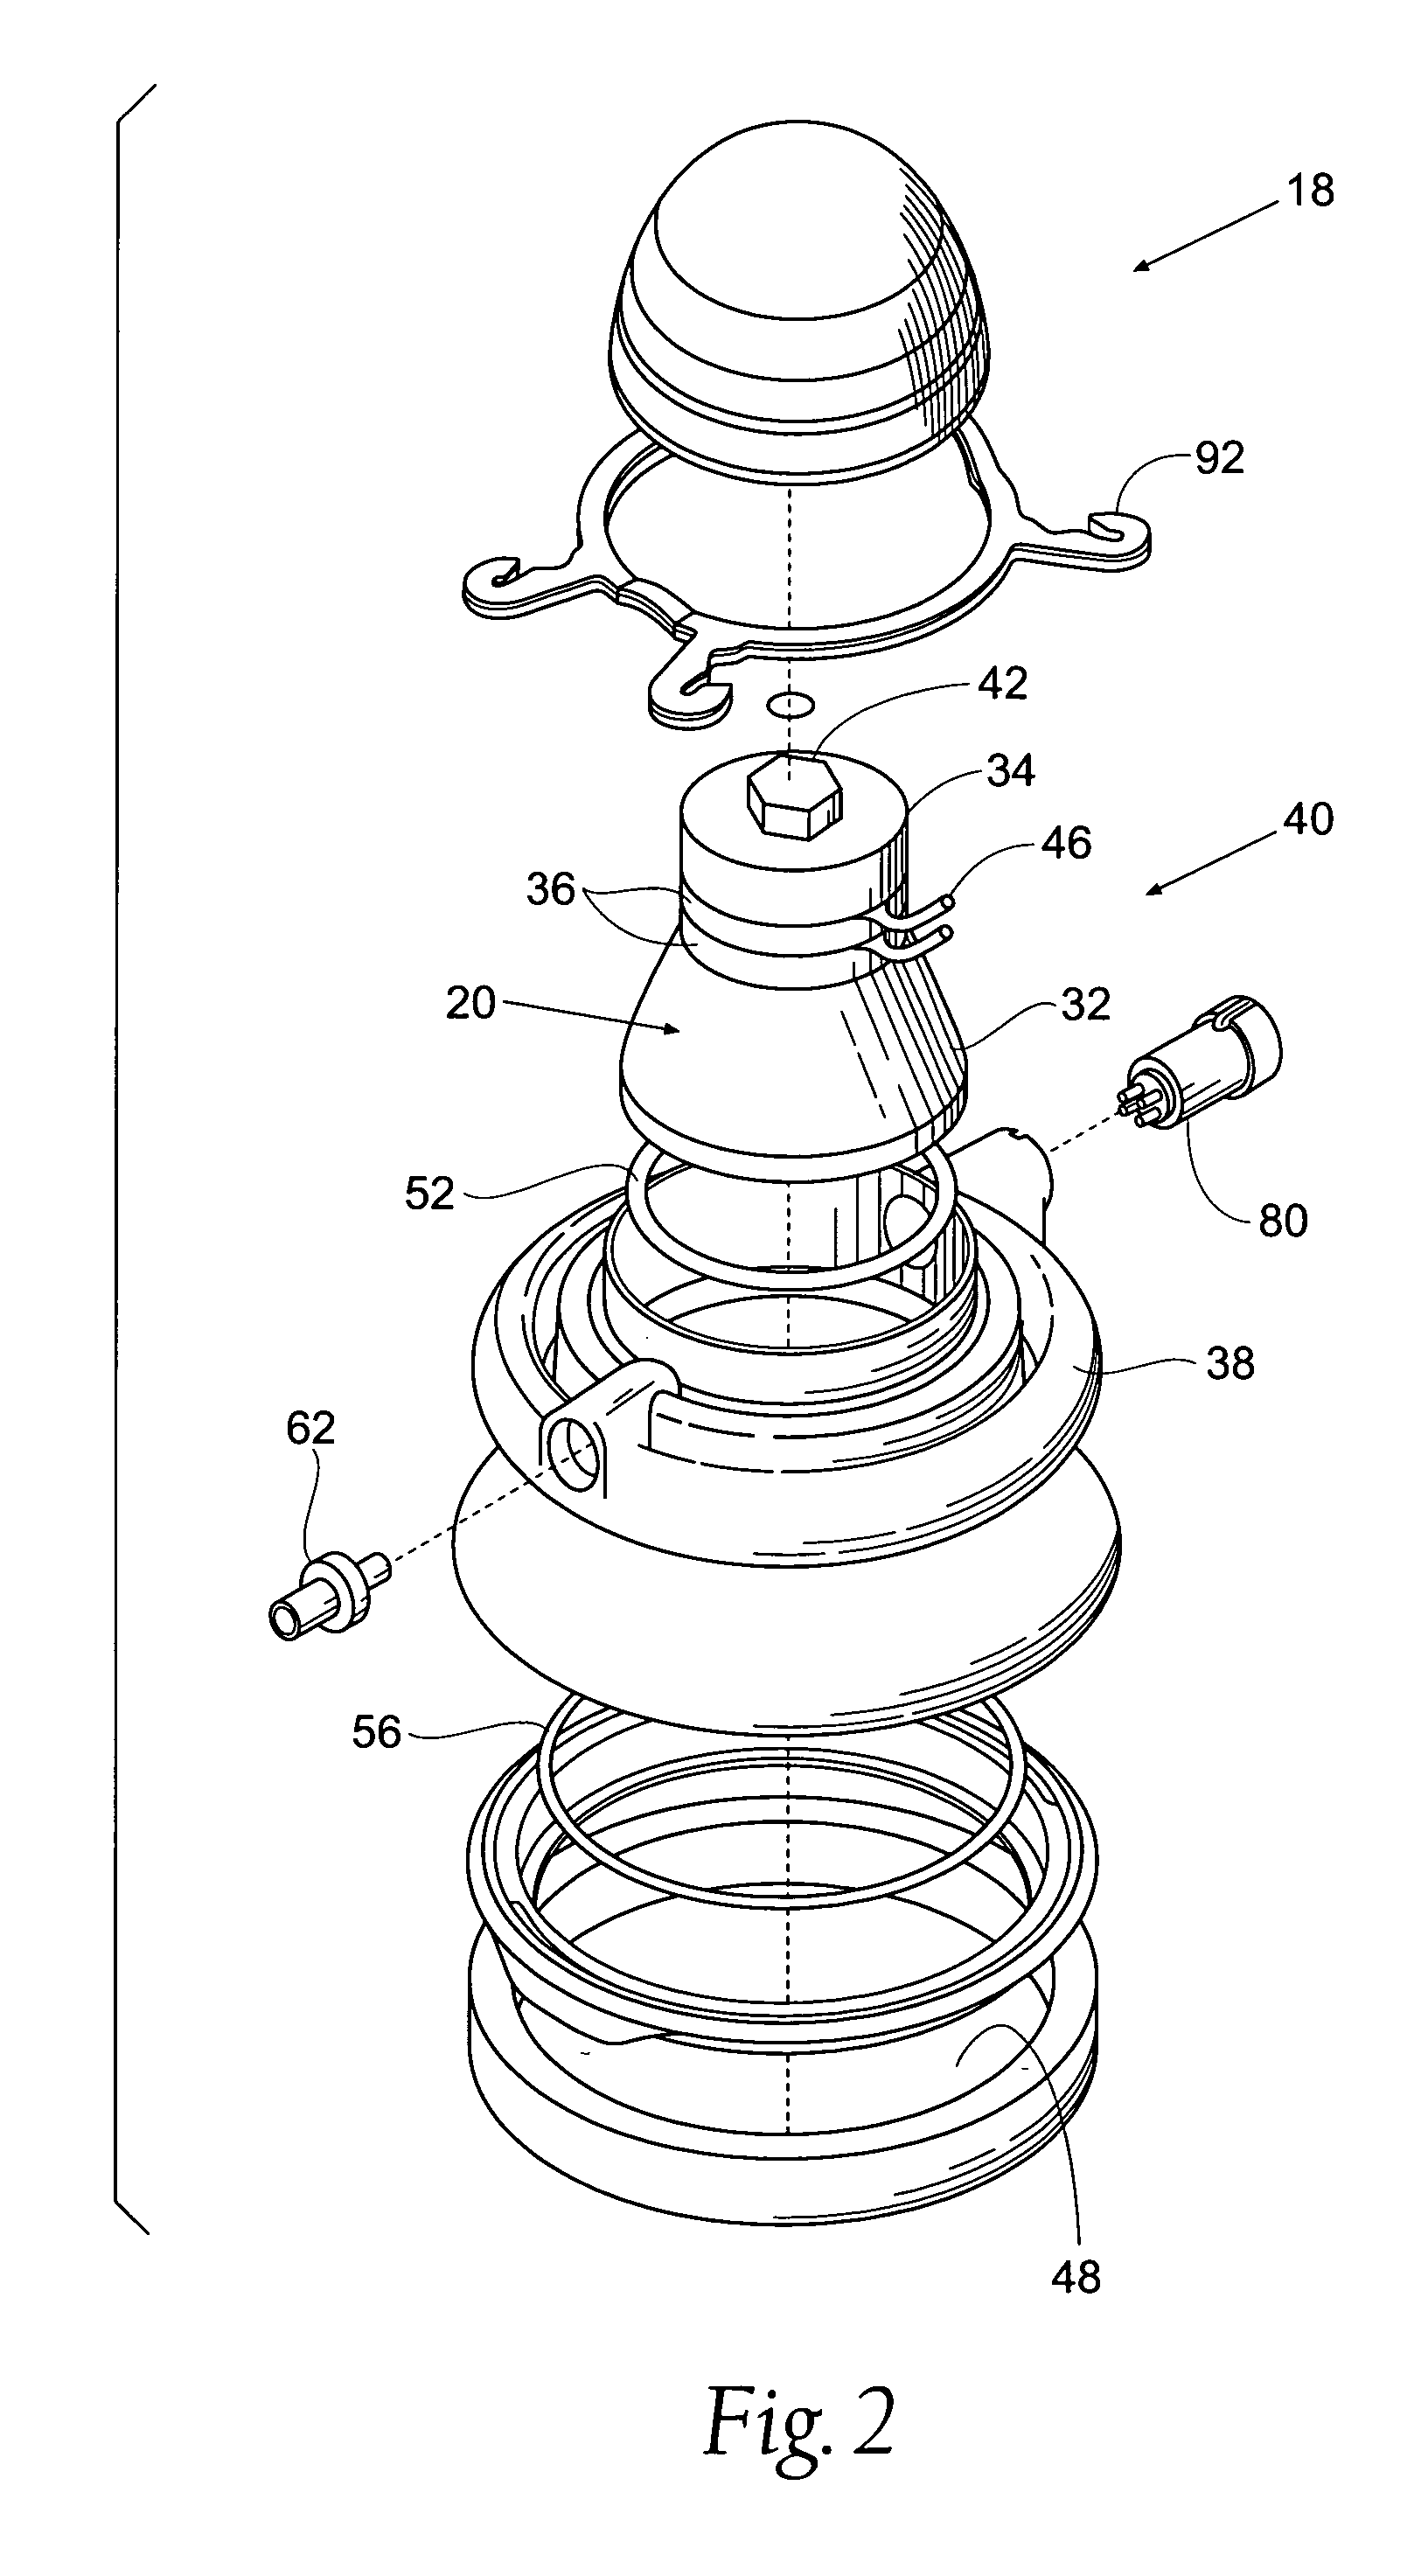 Systems and methods for applying ultrasound energy to increase tissue perfusion and/or vasodilation without substantial deep heating of tissue